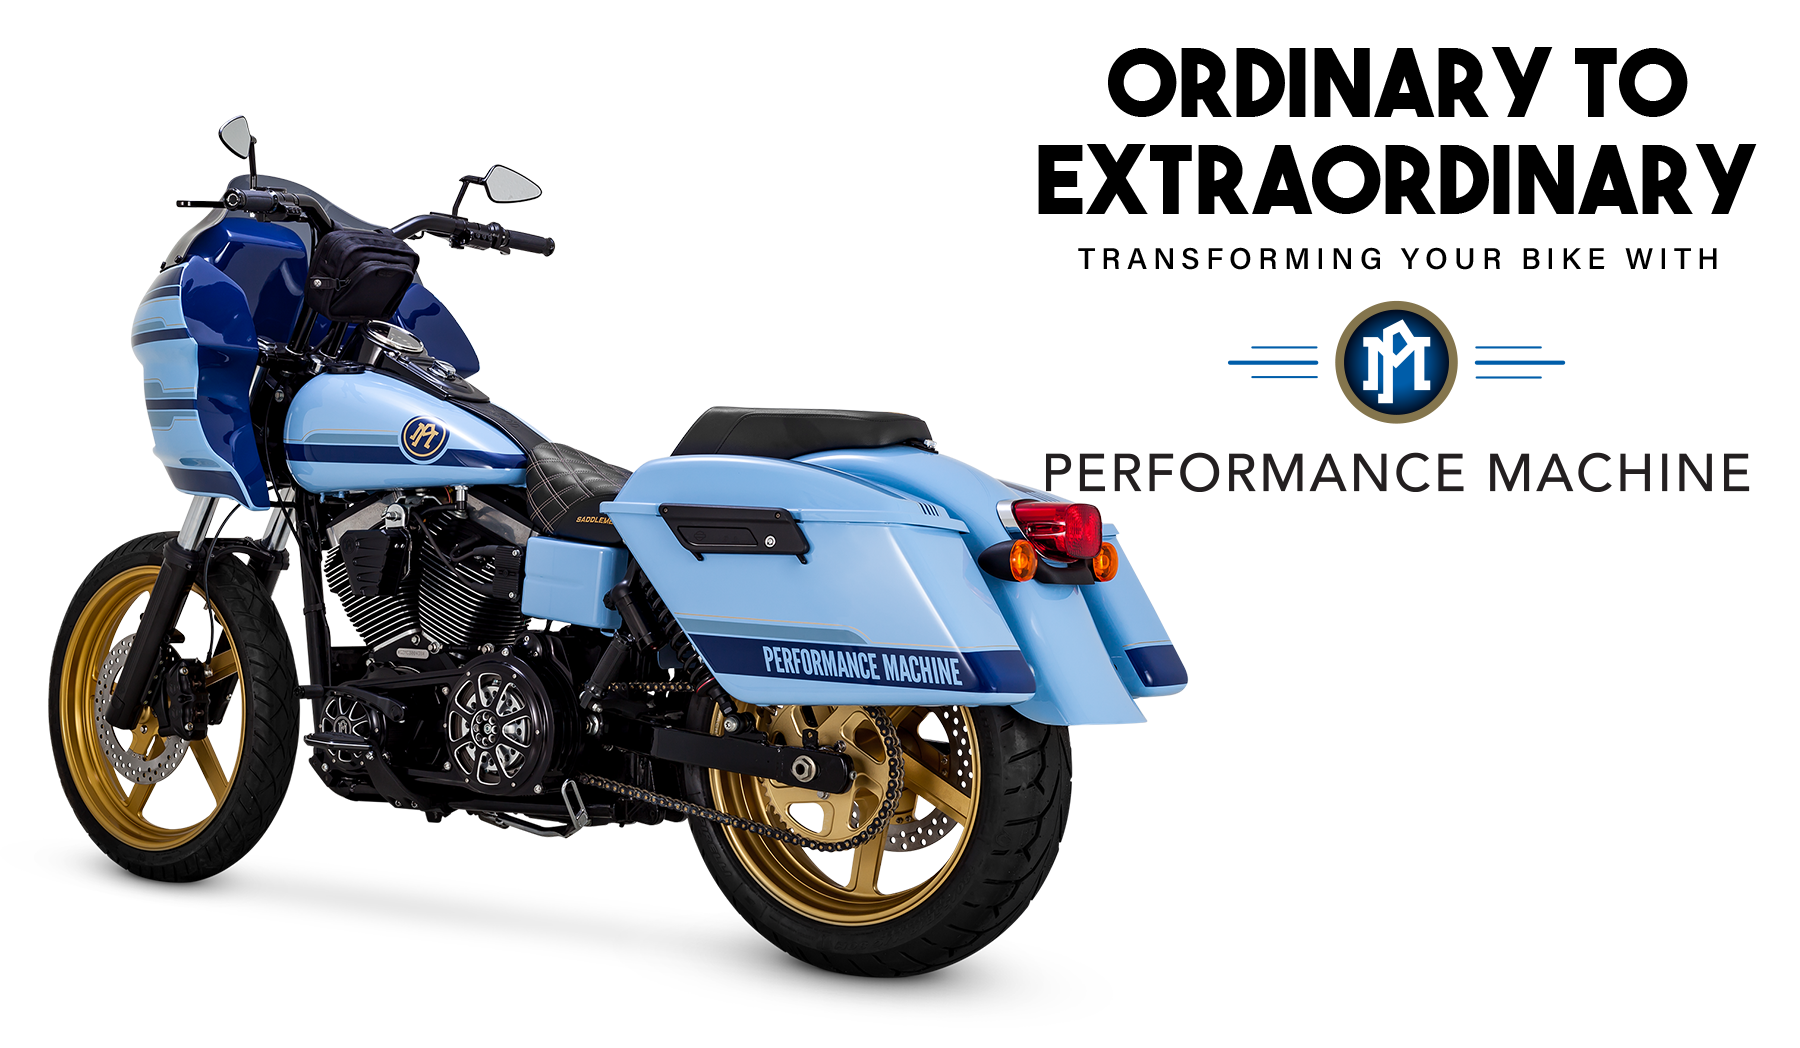 PERFORMANCE MACHINE: Transforming Your Bike From Ordinary To Extraordinary